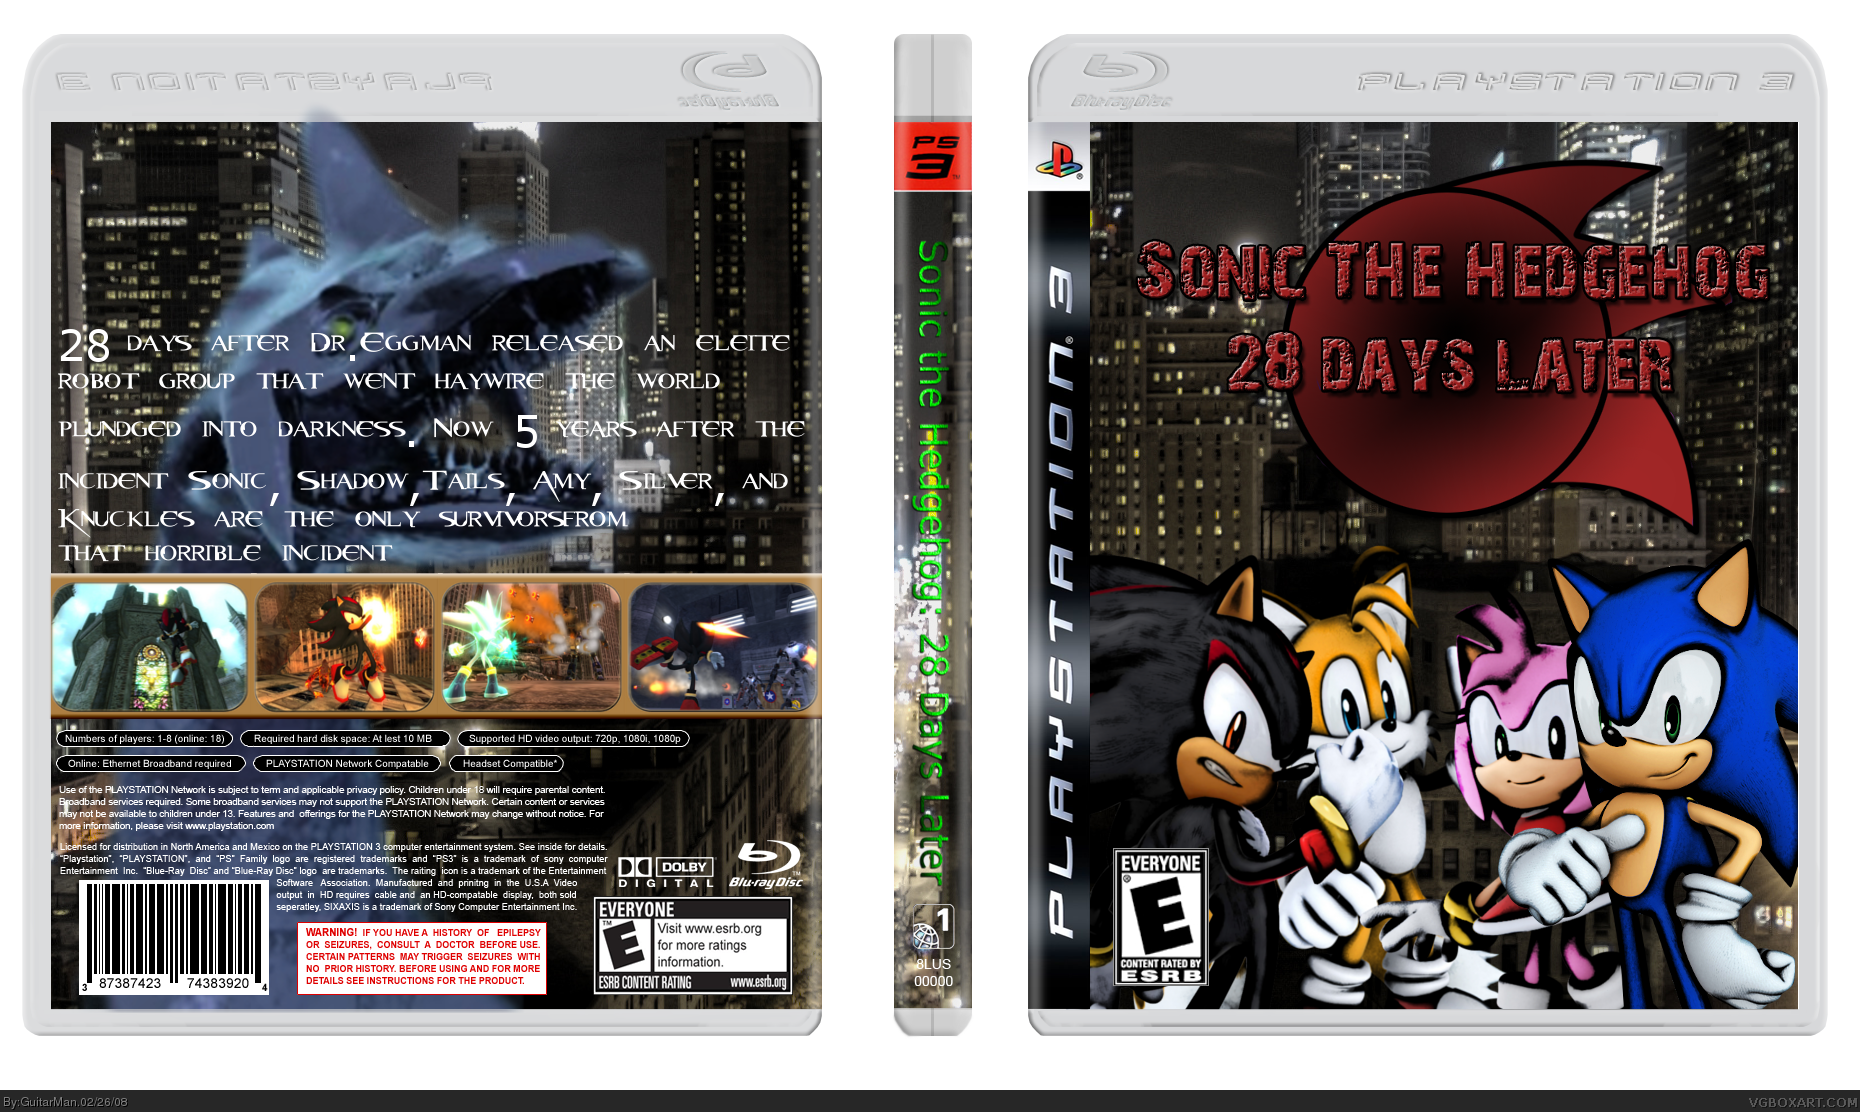 Sonic the Hedgehog: 28 Days Later box cover